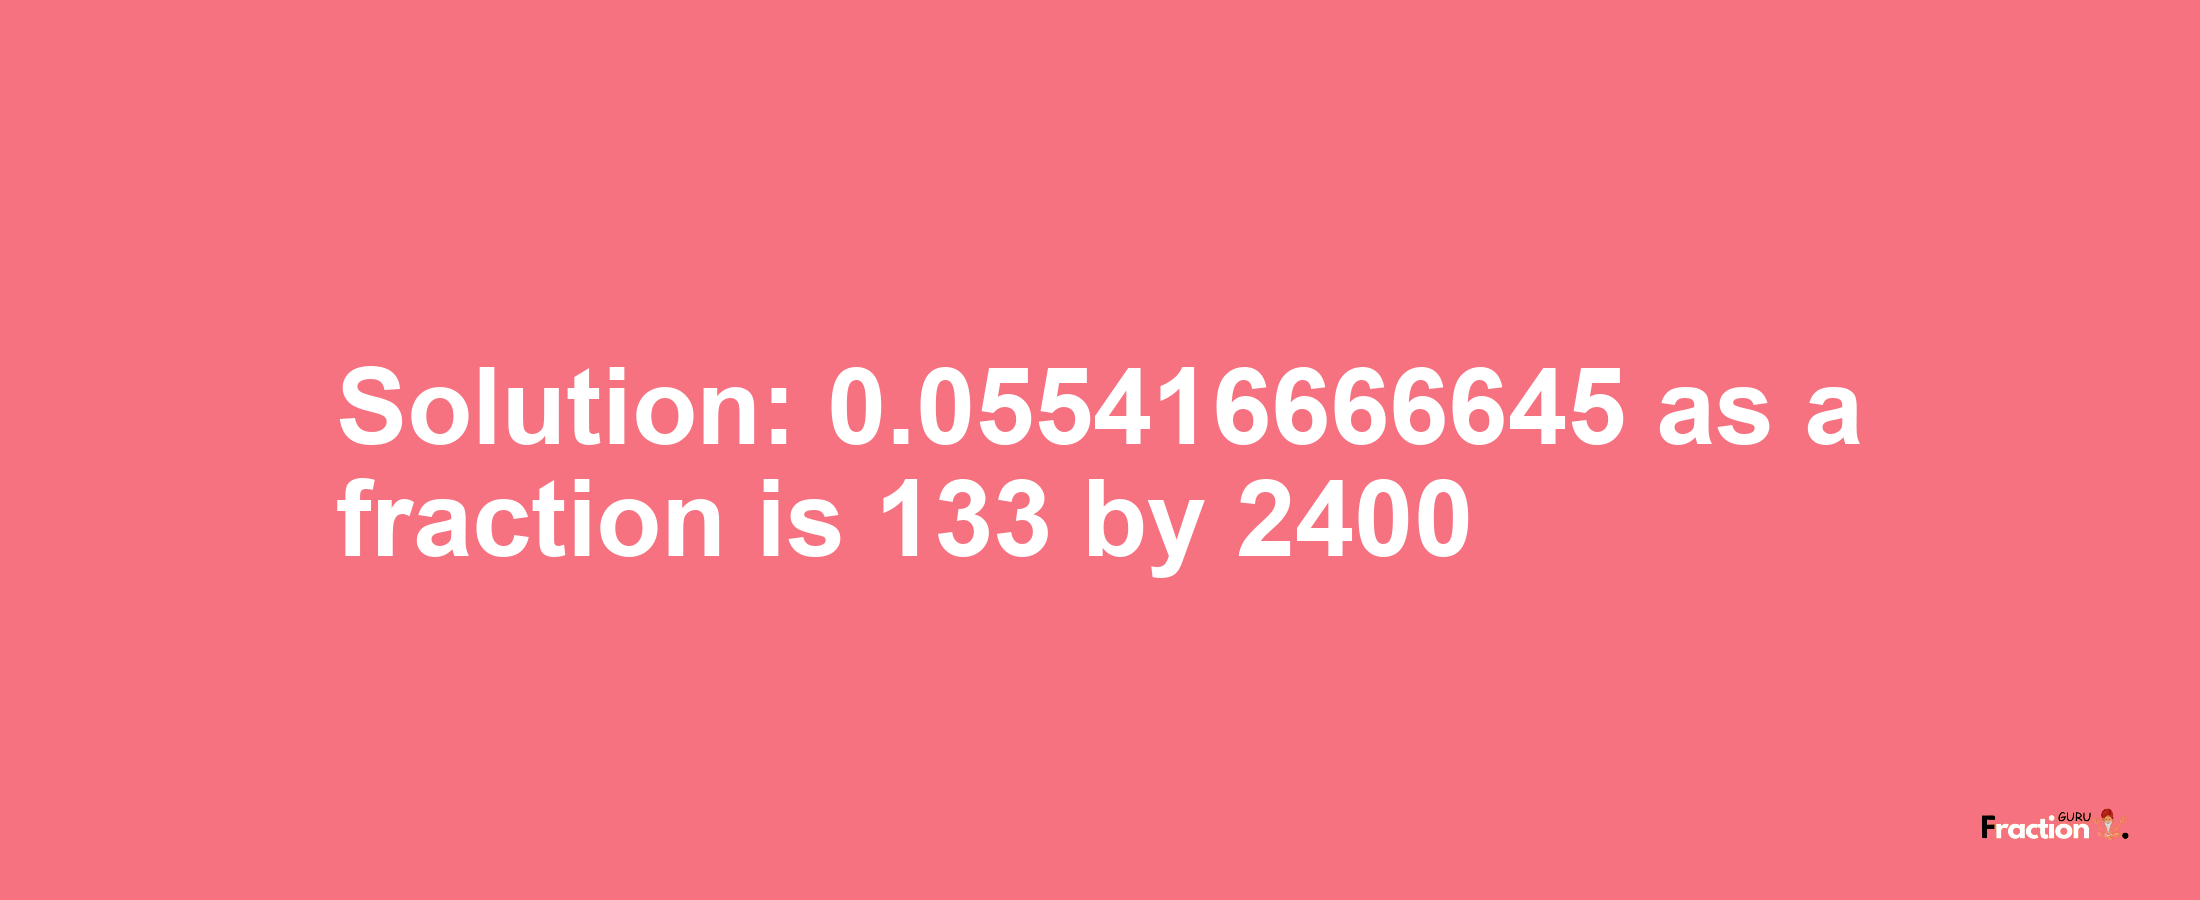 Solution:0.055416666645 as a fraction is 133/2400